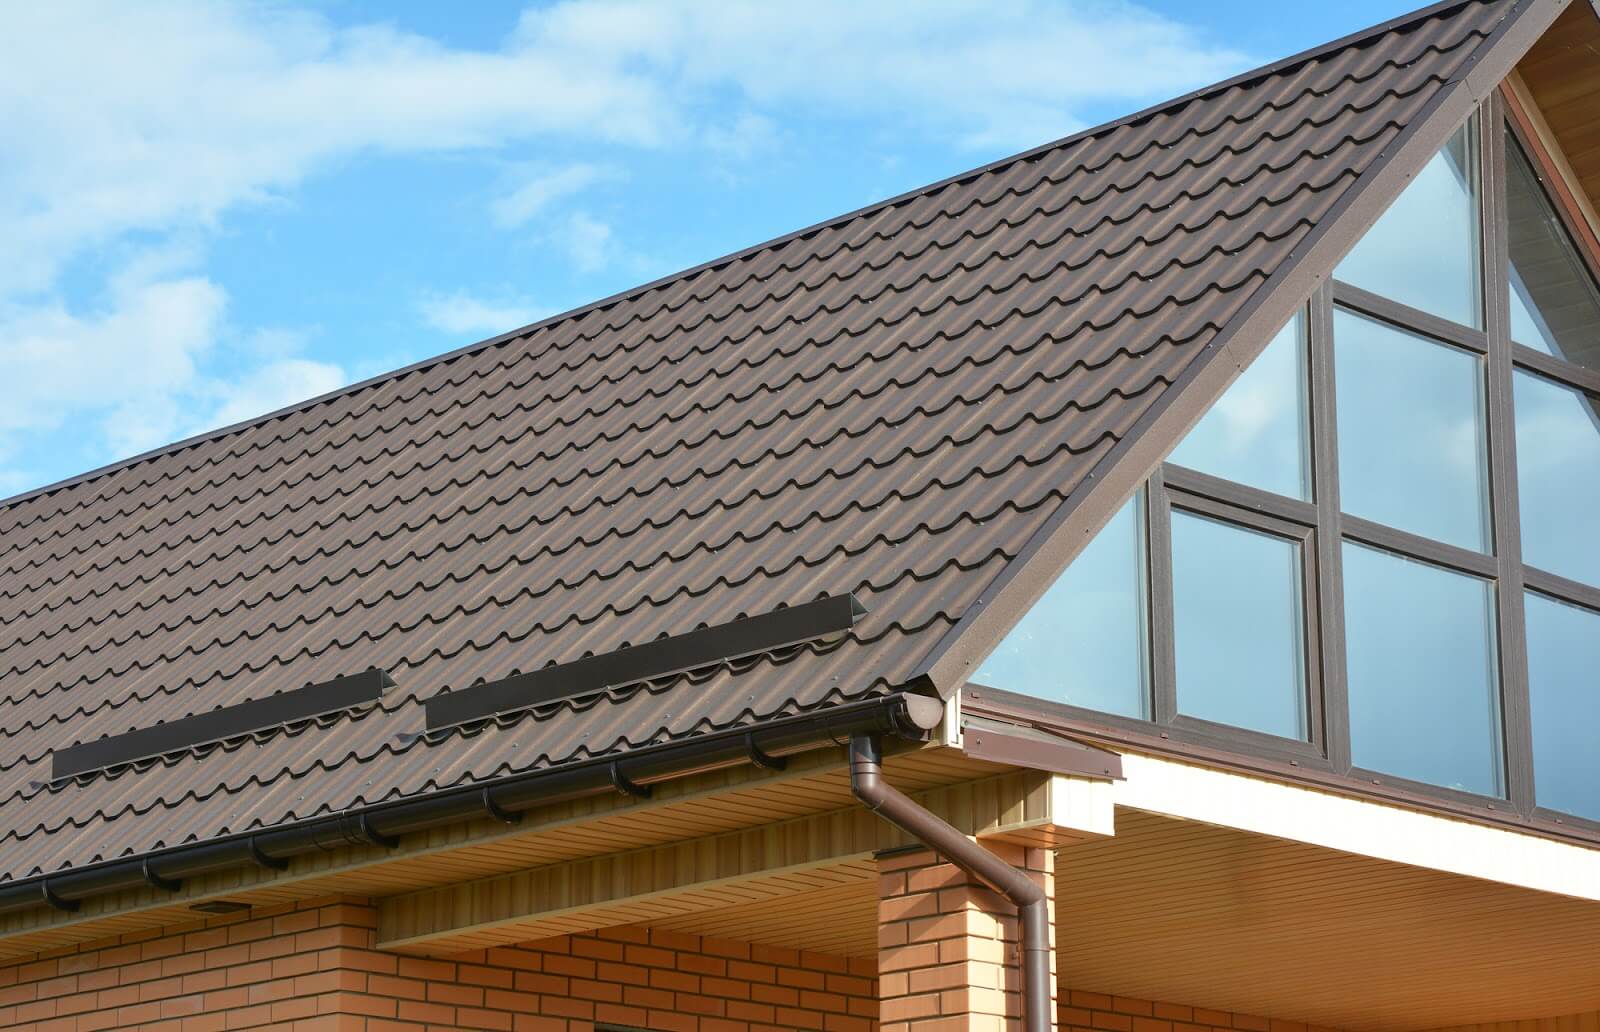 Understanding Metal Roof Thickness in Inches: A Comprehensive Guide